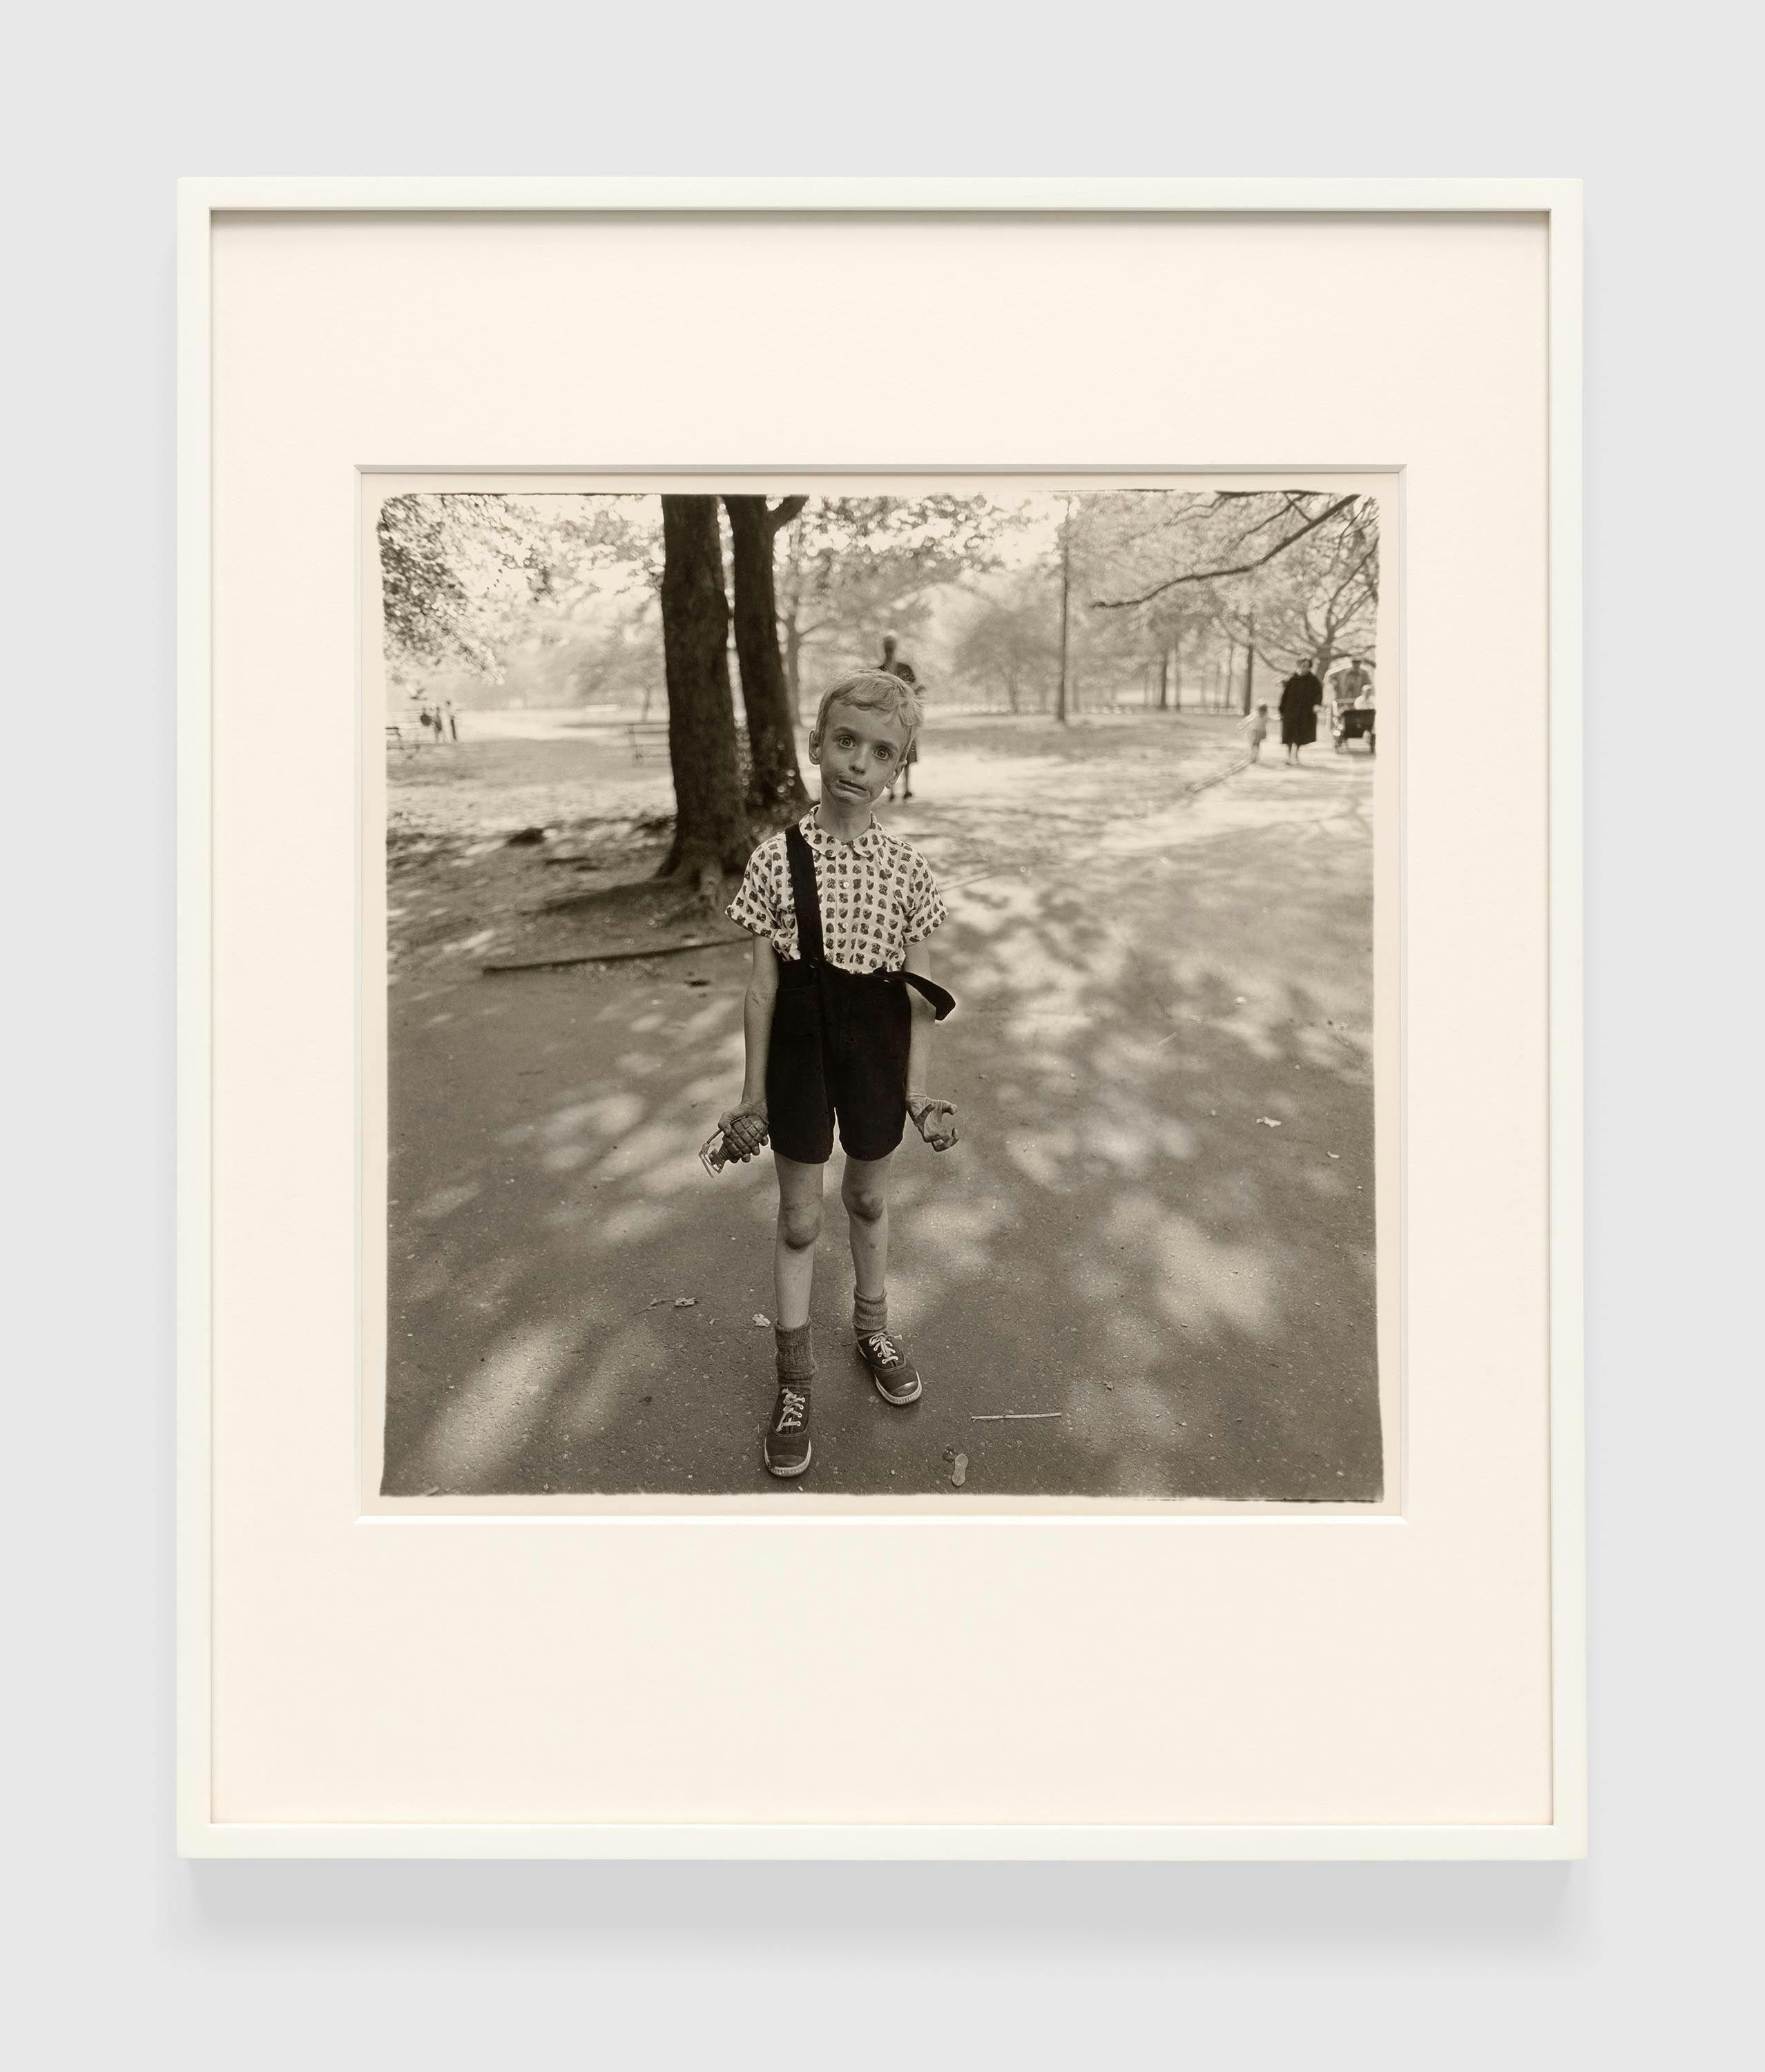 A gelatin silver print by Diane Arbus, titled Child with a toy hand grenade in Central Park, N.Y.C. 1962, dated 1962.